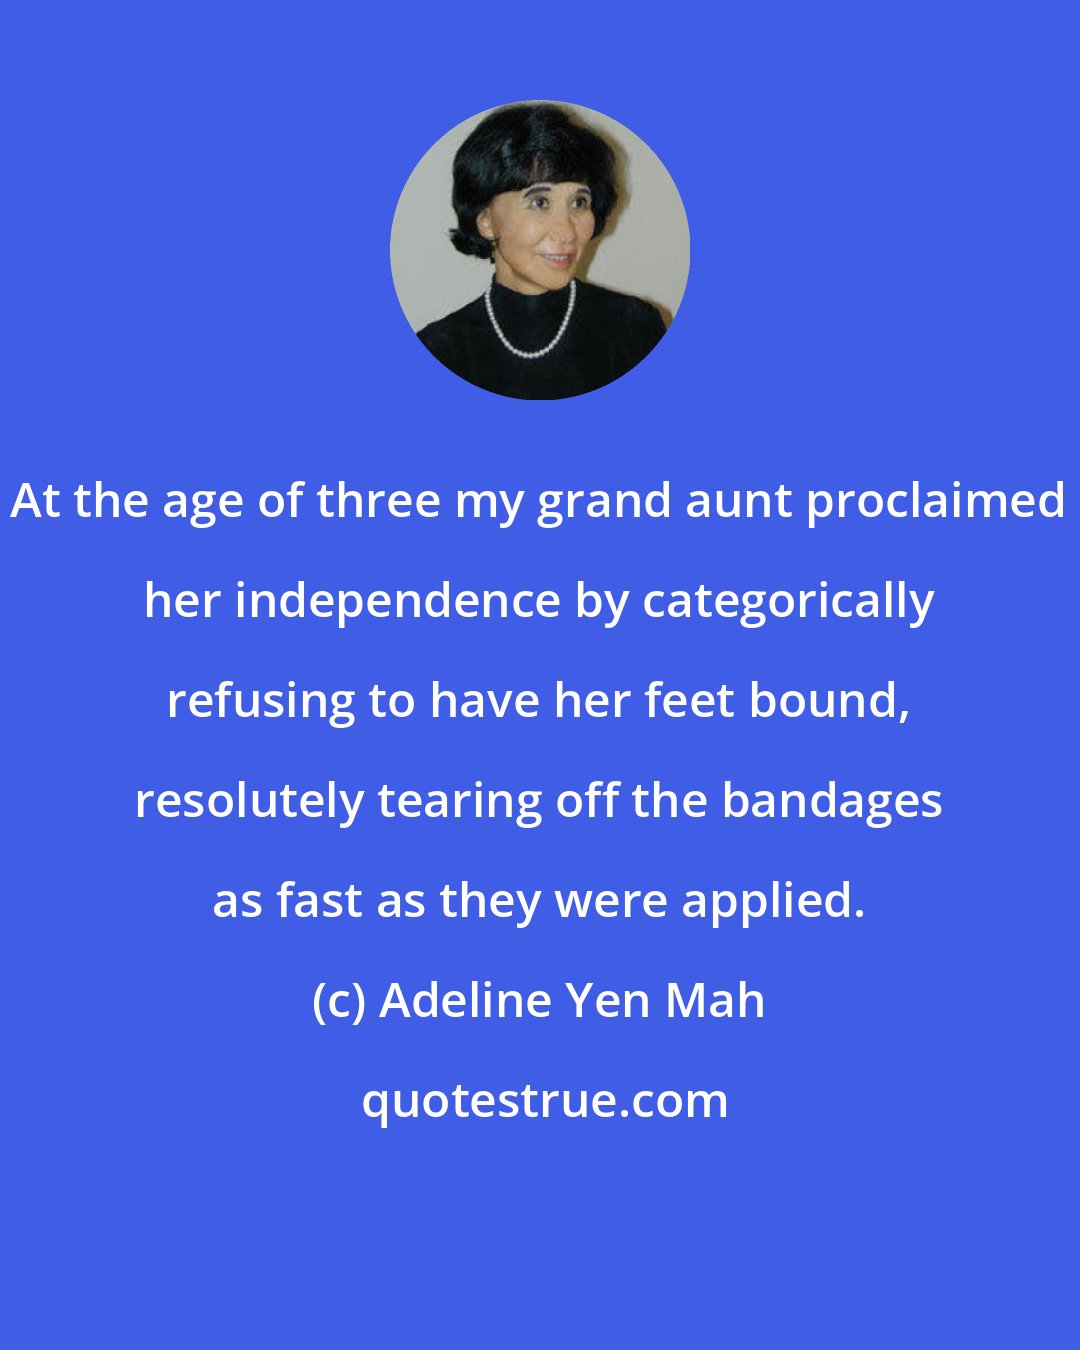 Adeline Yen Mah: At the age of three my grand aunt proclaimed her independence by categorically refusing to have her feet bound, resolutely tearing off the bandages as fast as they were applied.